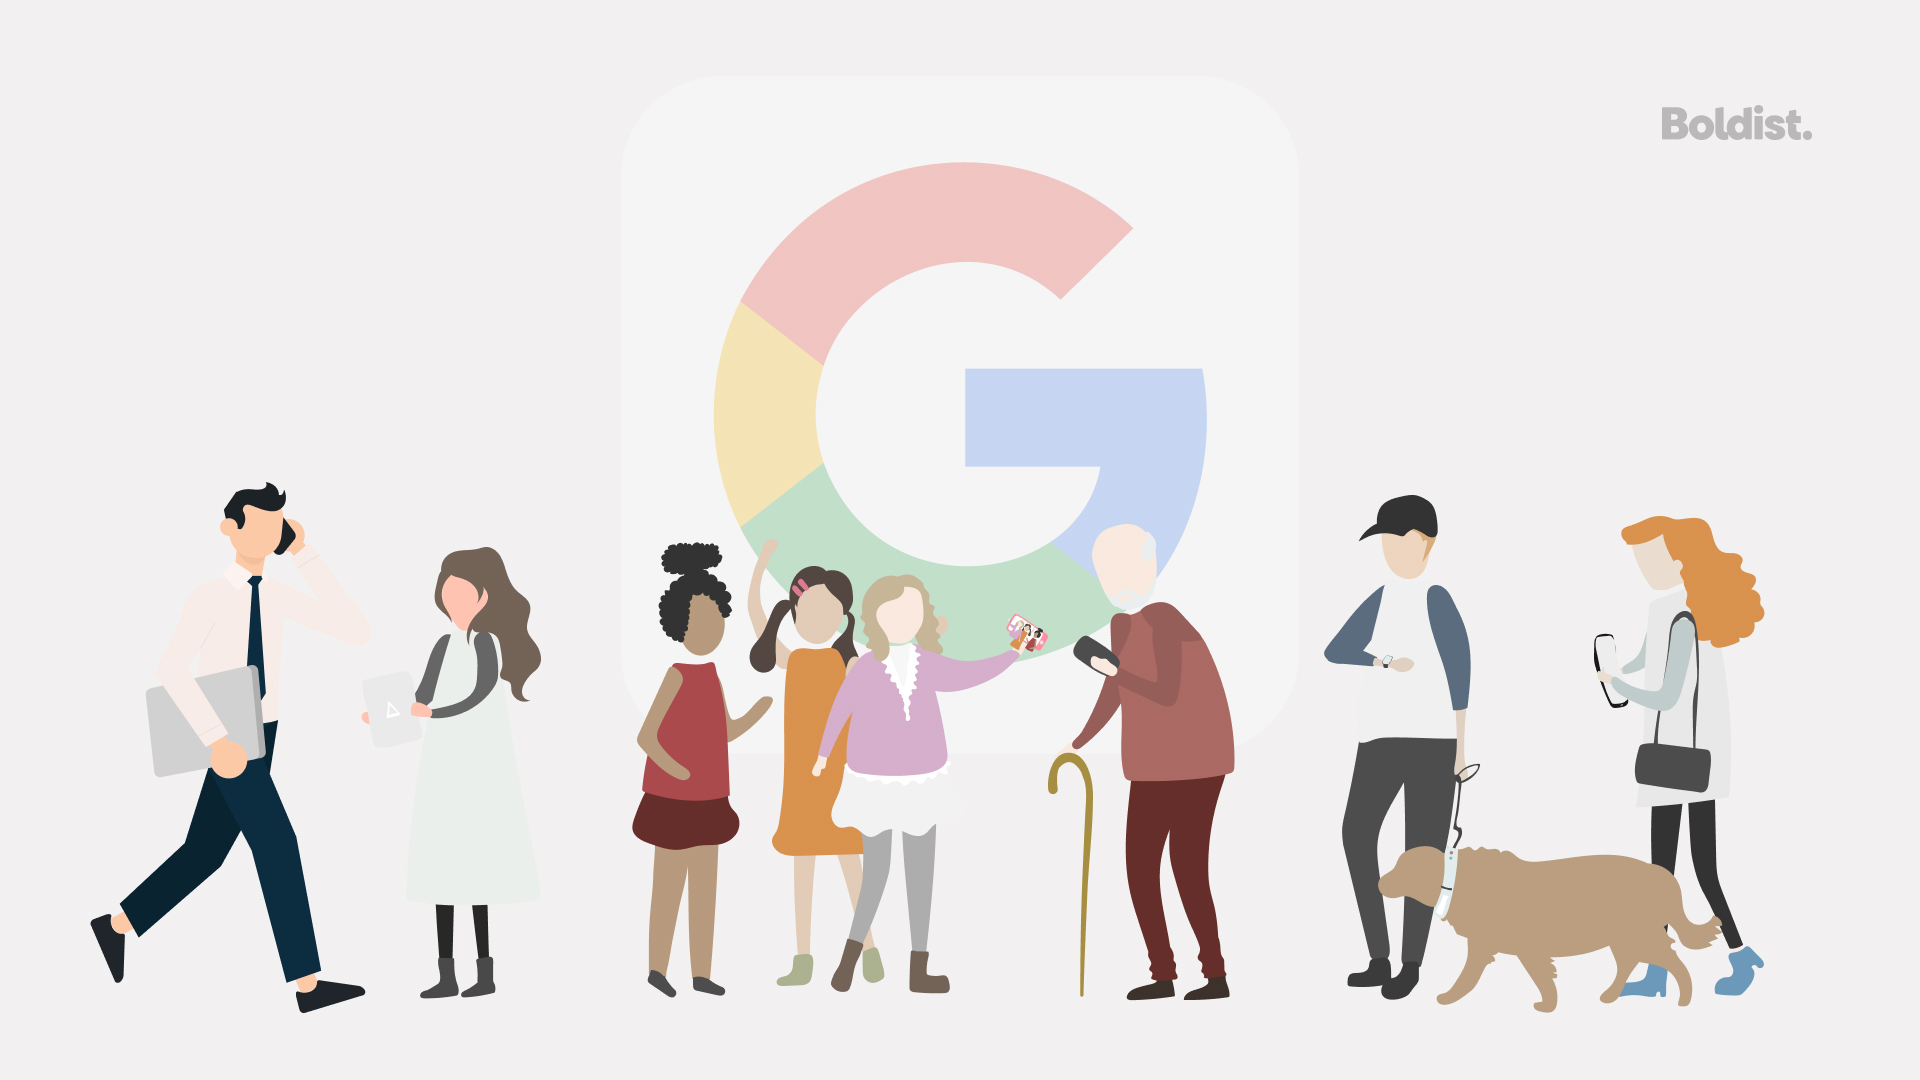 Illustration of different types of people in front of the Google logo